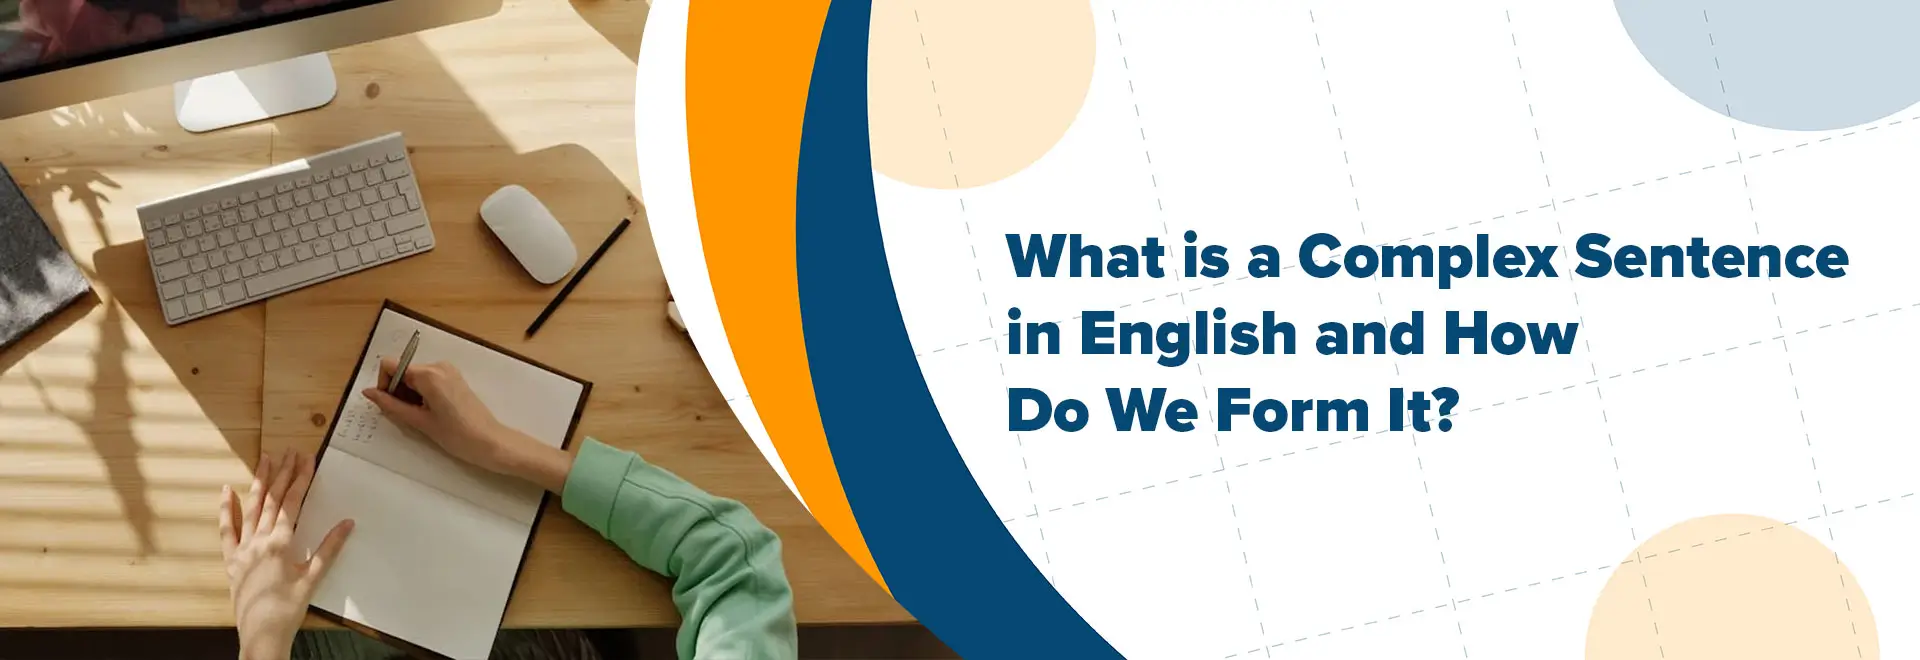 What is a Complex Sentence in English and How Do We Form It?